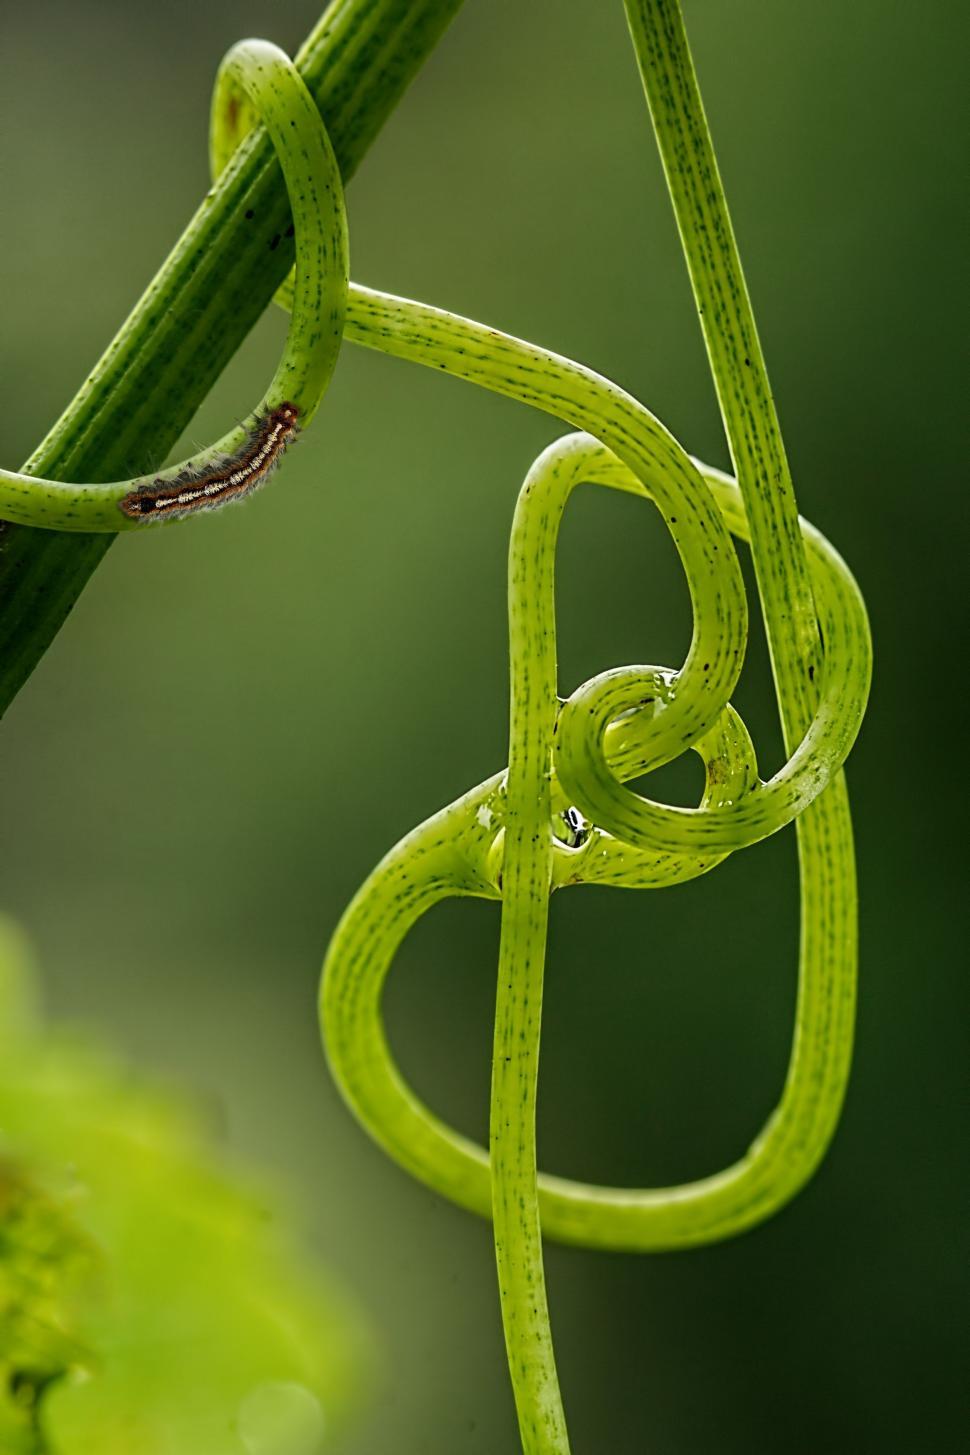 Free Image of grape vine tendril climbing plant green vine grapevine loop growth growing knot noose tangle complicated nature macro caterpillar 